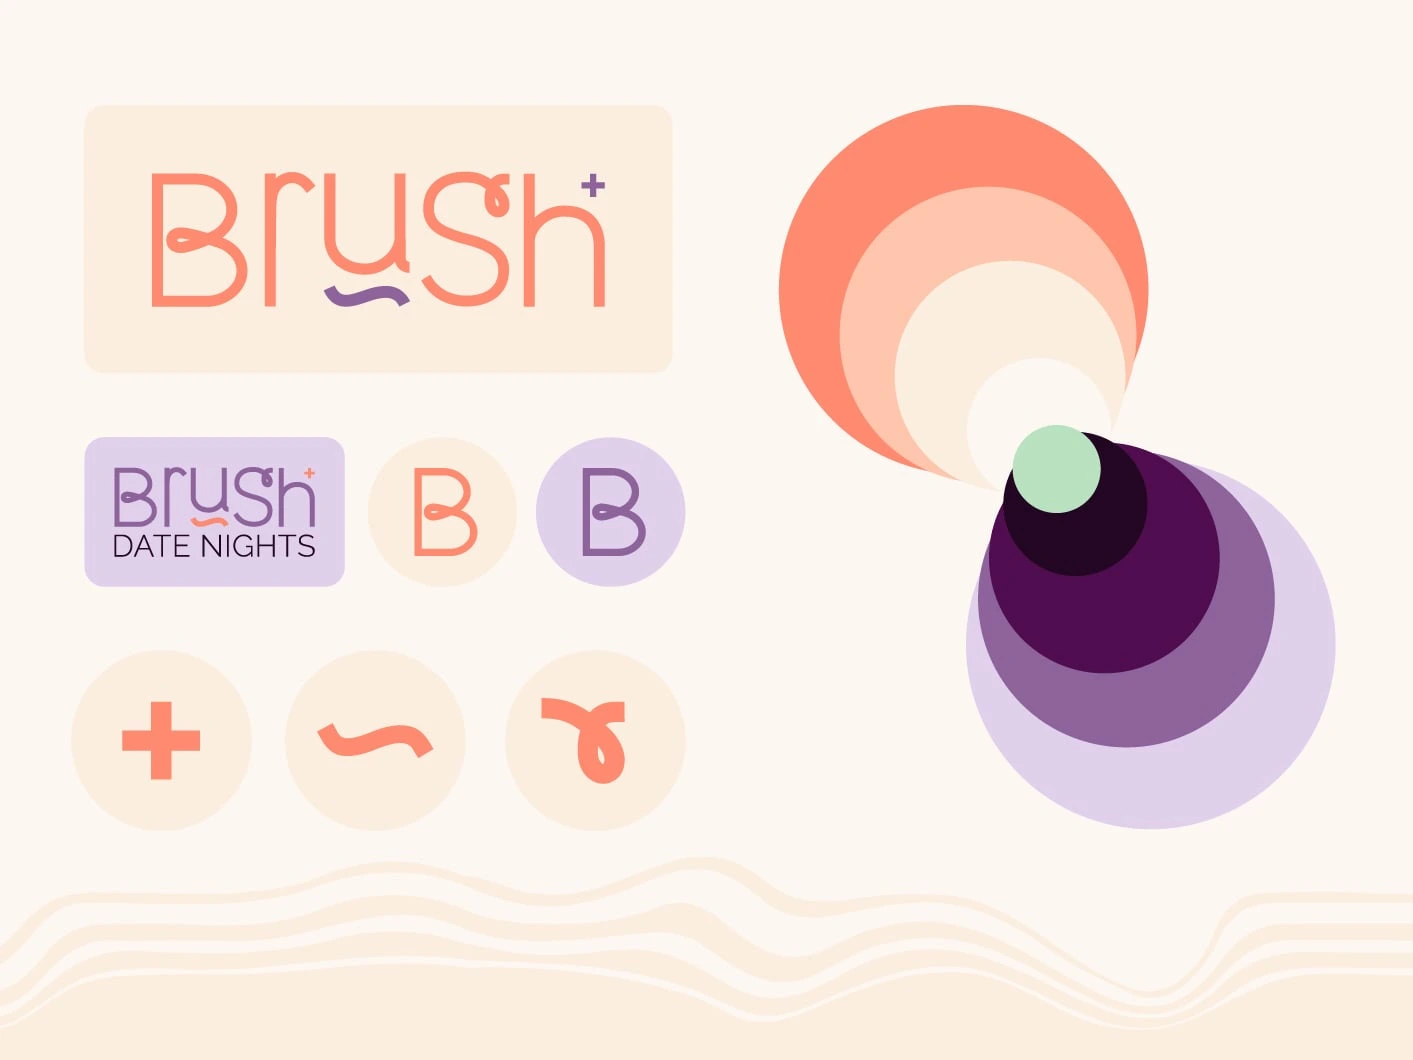 Logo and image of Brush, a branding project for the self-employed Anna Kniaz, which was created for her by Komsulting.